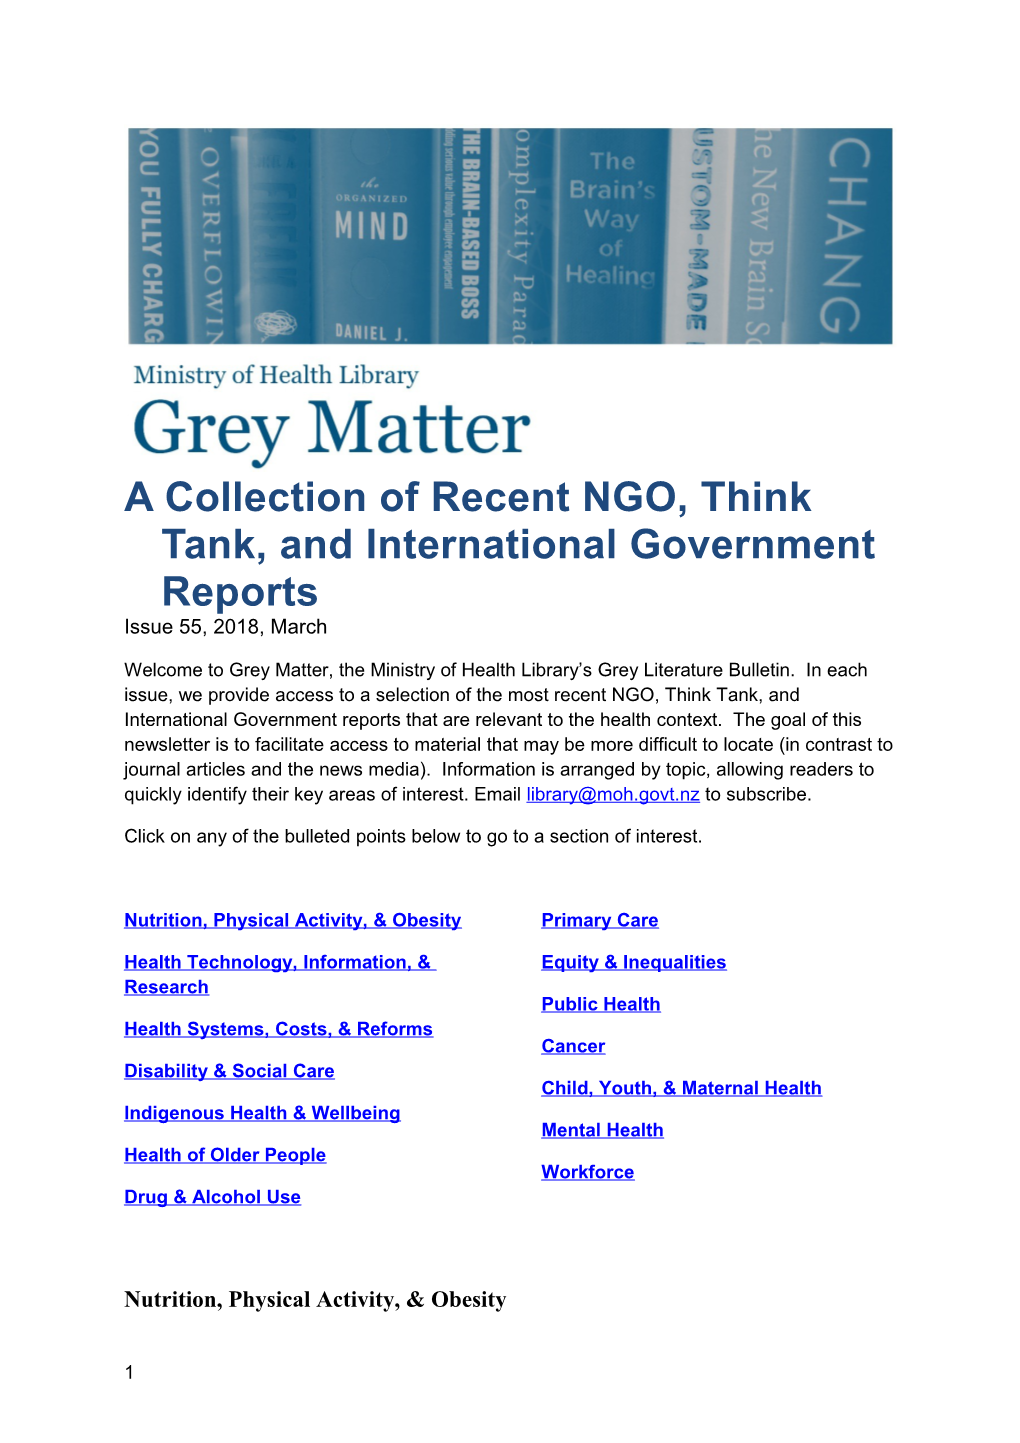 Grey Matter, Issue 55, March 2018